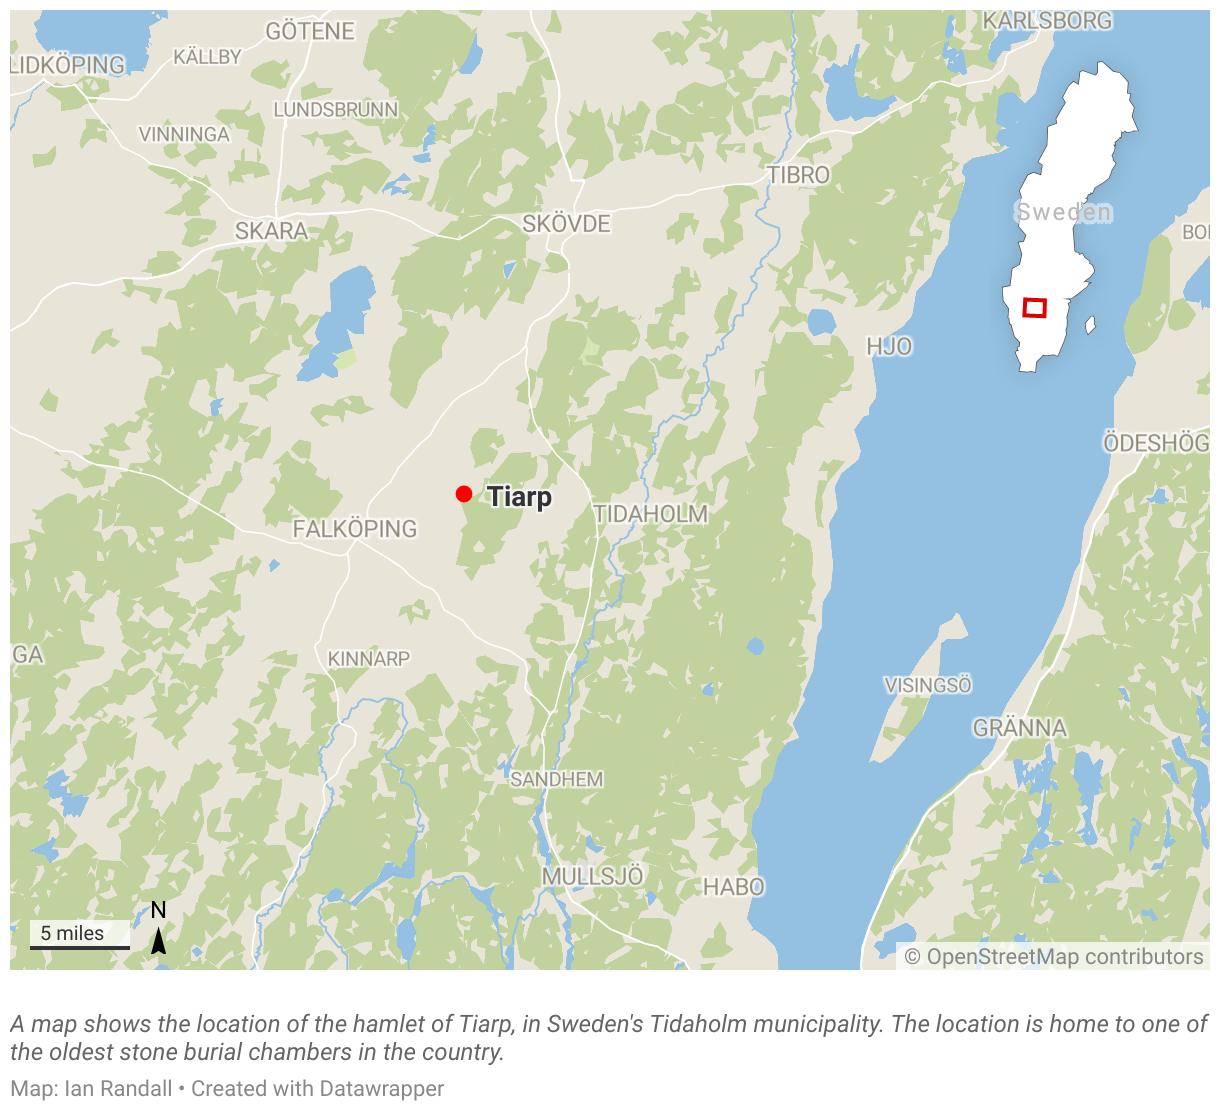 A map shows the location of the hamlet of Tiarp, in Sweden's Tidaholm municipality.